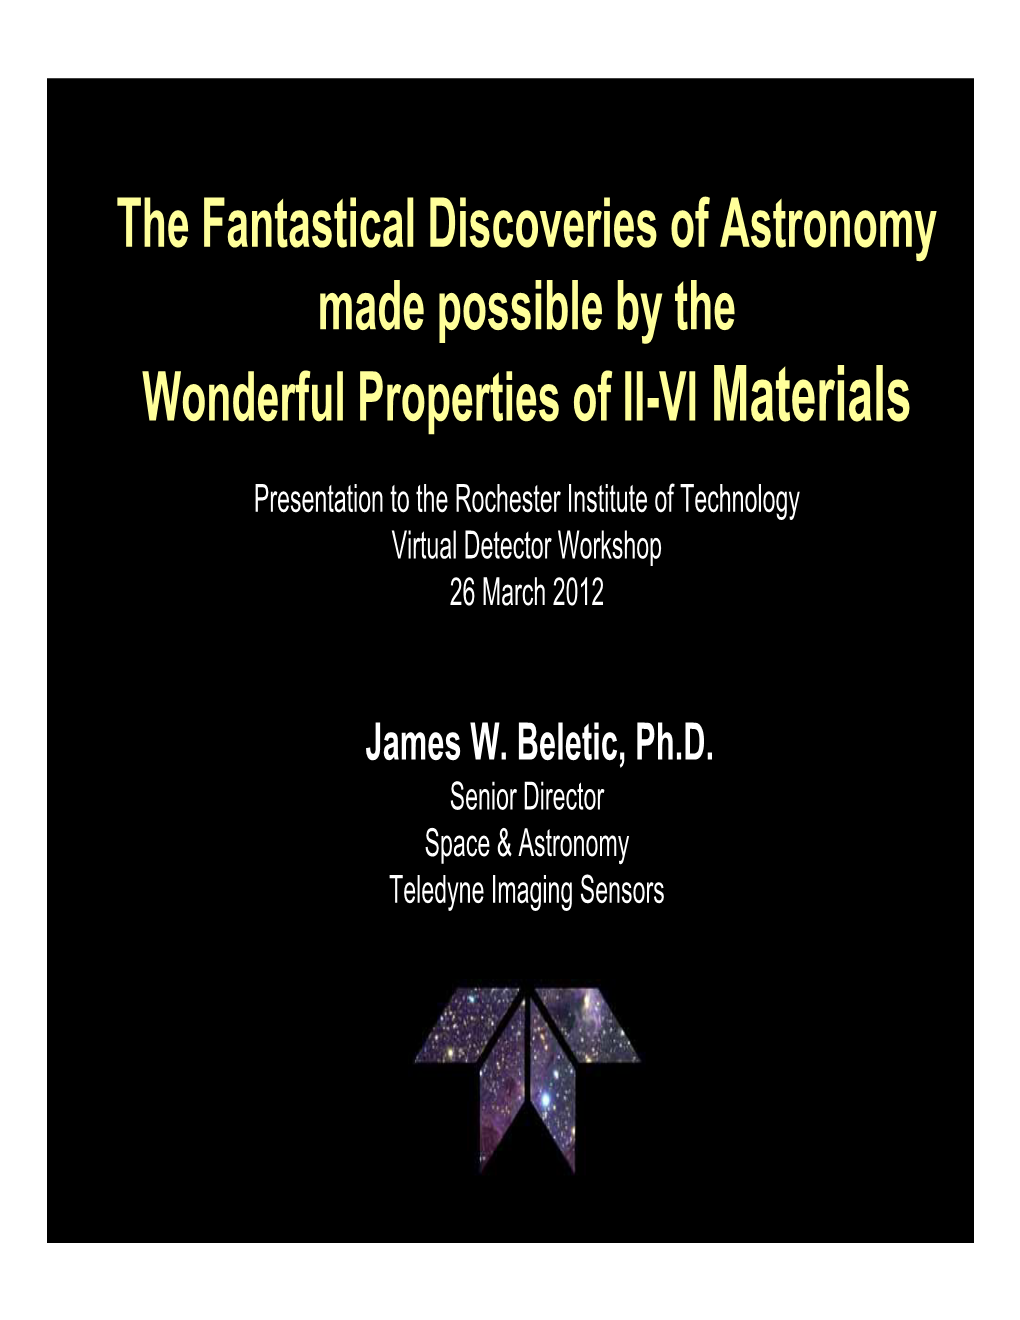 The Fantastical Discoveries of Astronomy Made Possible by the Wonderful Properties of II-VI Materials